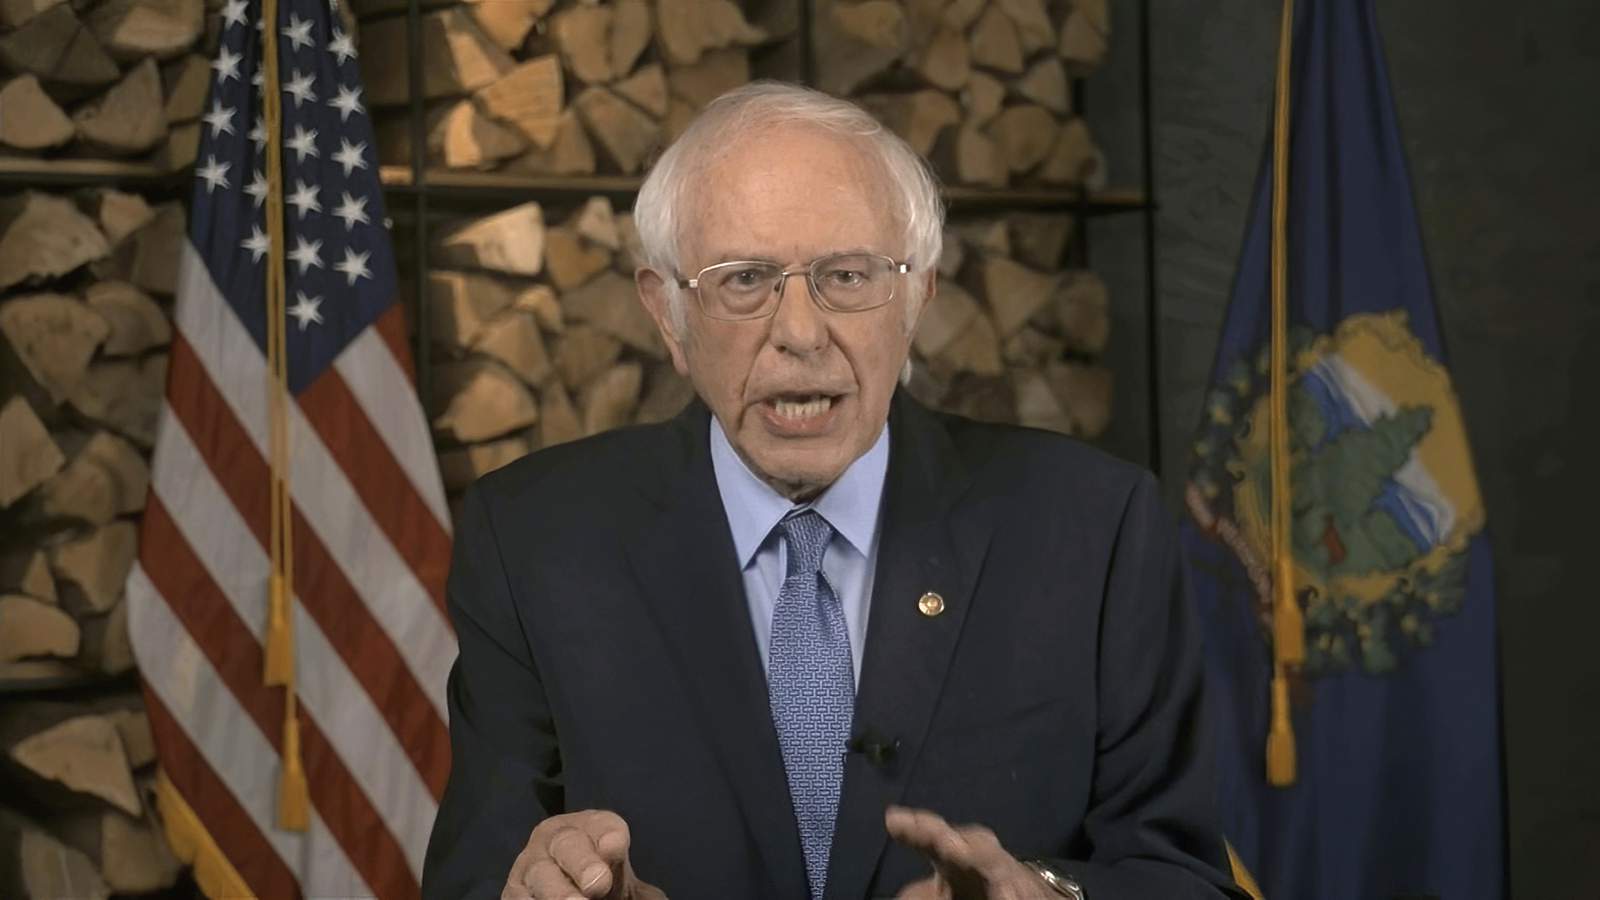 Bernie Sanders to campaign for Biden today in Ann Arbor, Macomb County